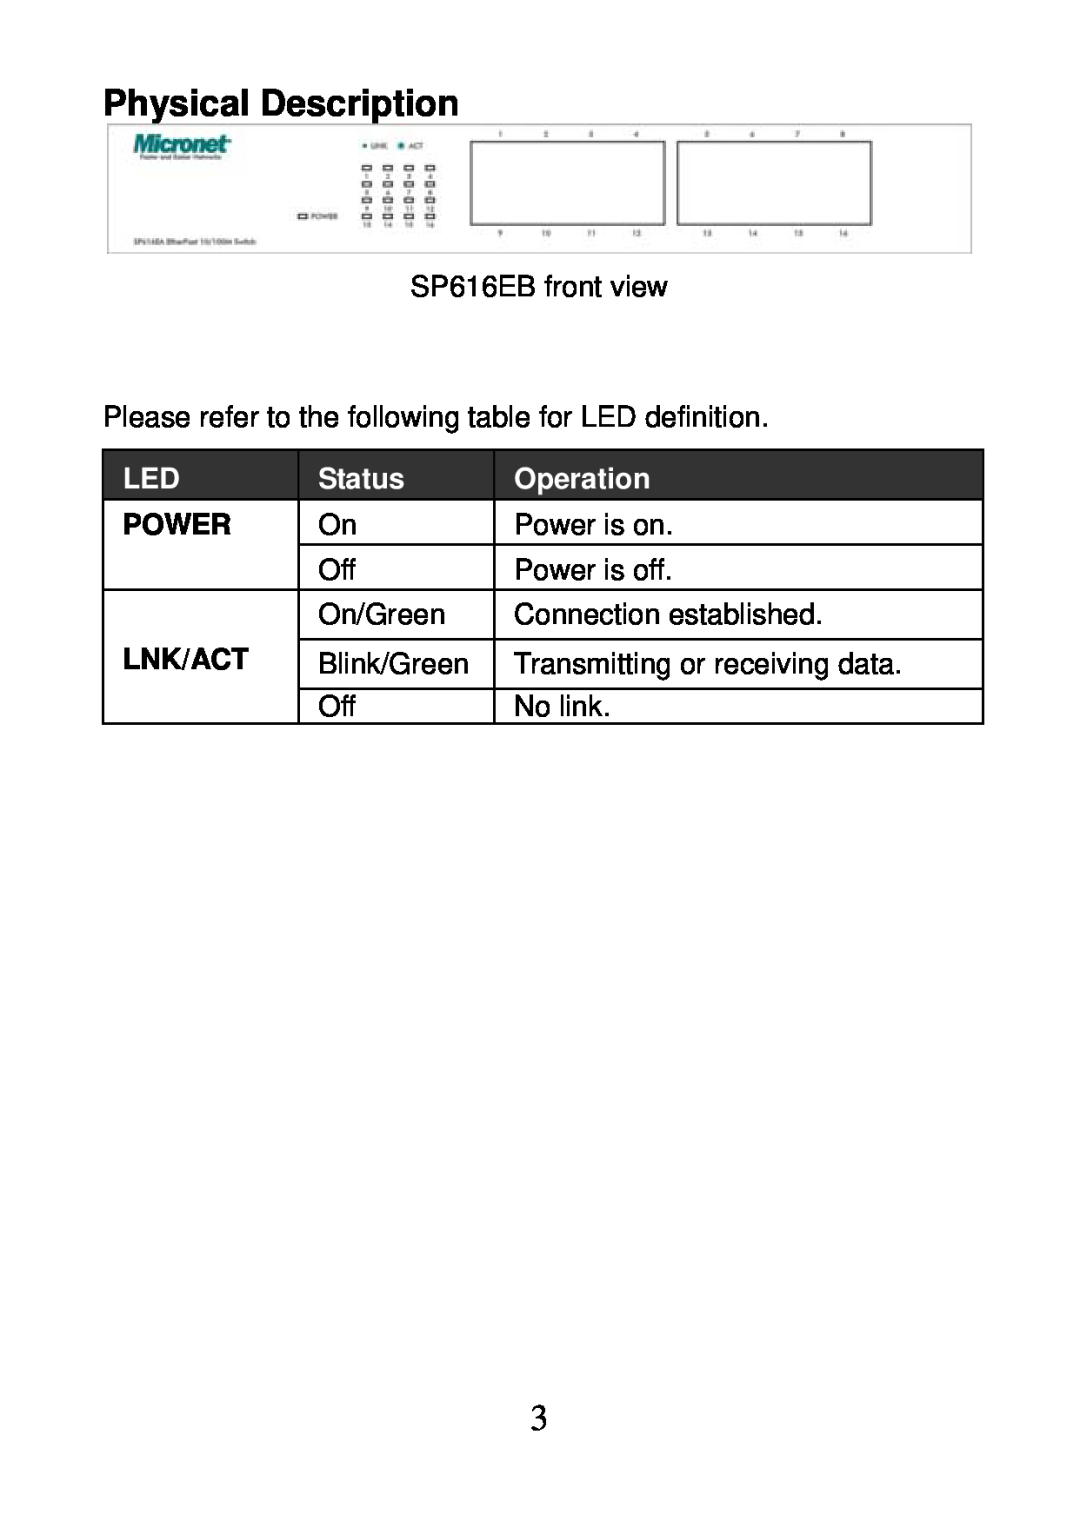 MicroNet Technology SP616EB manual Physical Description, Power, Lnk/Act, Status, Operation 